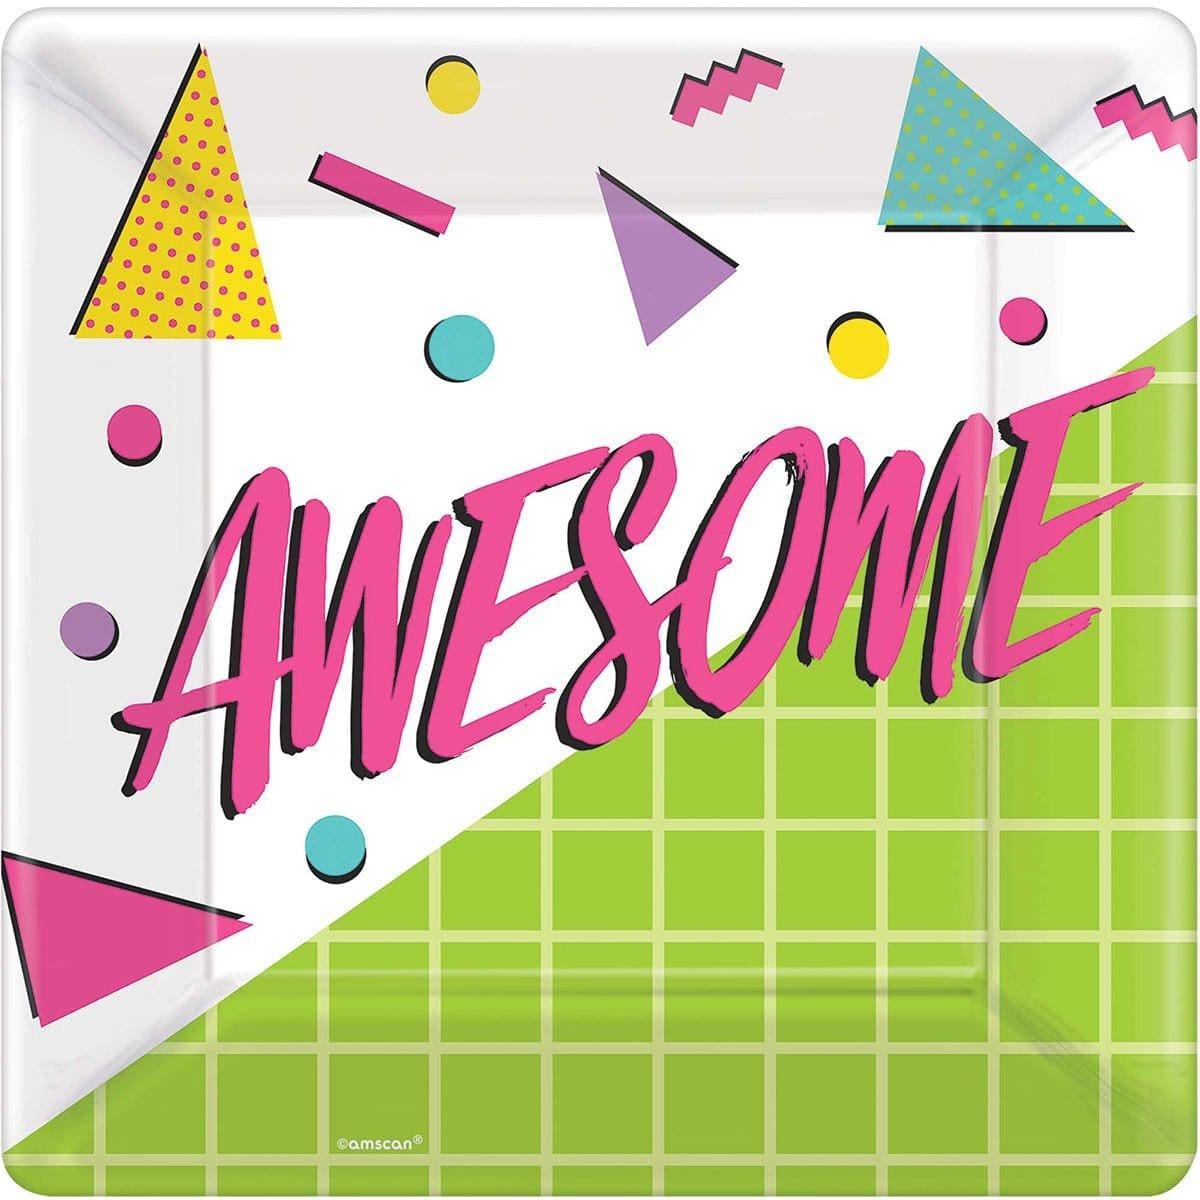 Buy Theme Party Awesome Party Paper Plates 10 Inches, 8 per Package sold at Party Expert